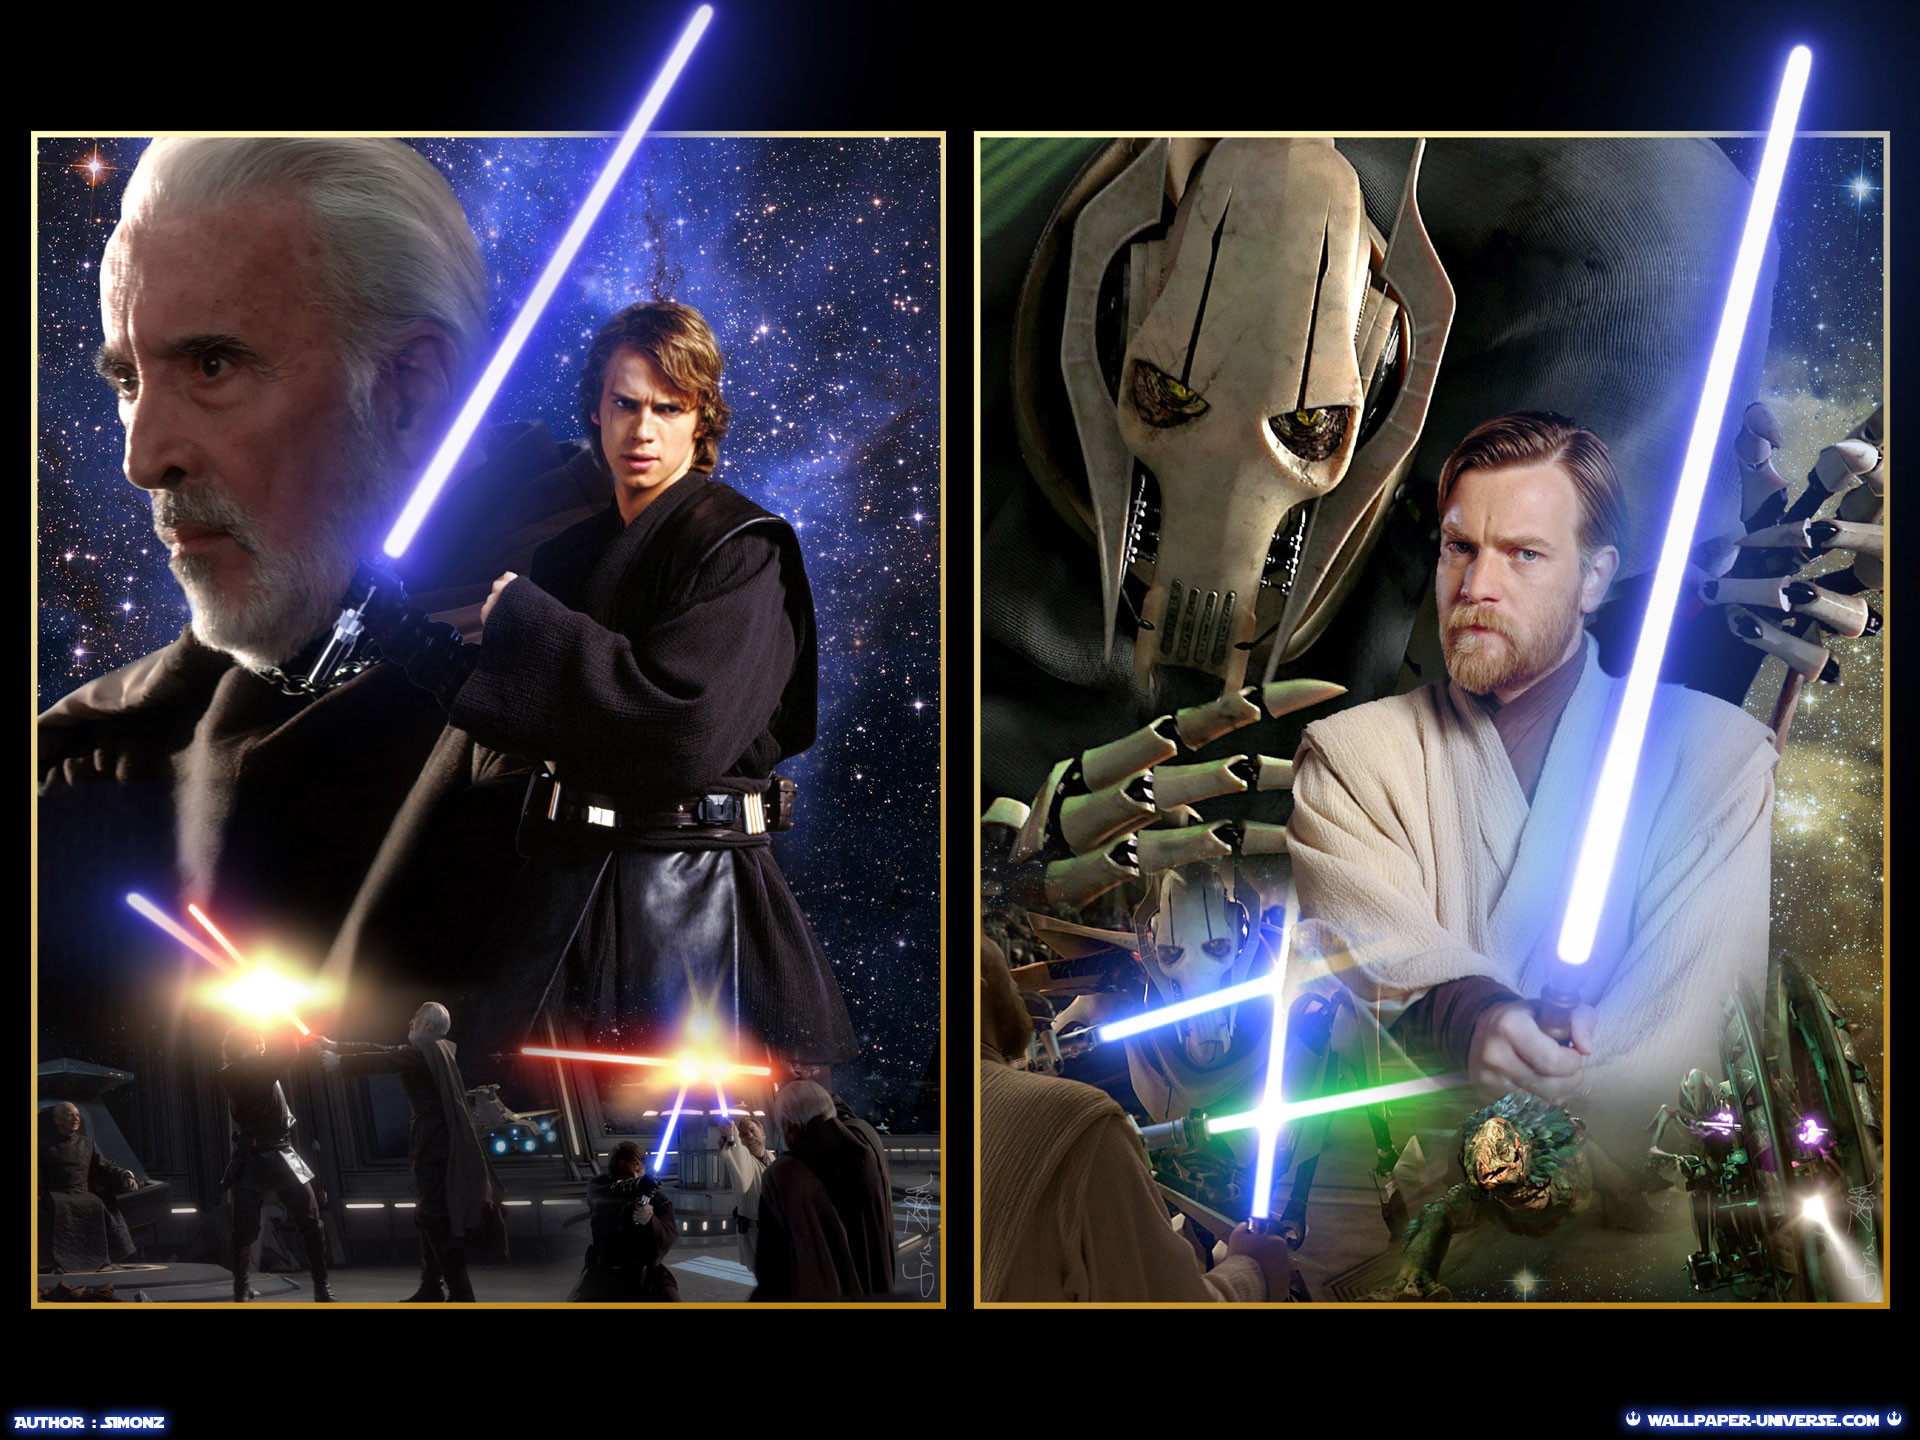 1920x1440 Star Wars: Revenge of the Sith images ROTS (Ep. III) - Anakin vs. Dooku &  Obi-Wan vs. General Grievous HD wallpaper and background photos